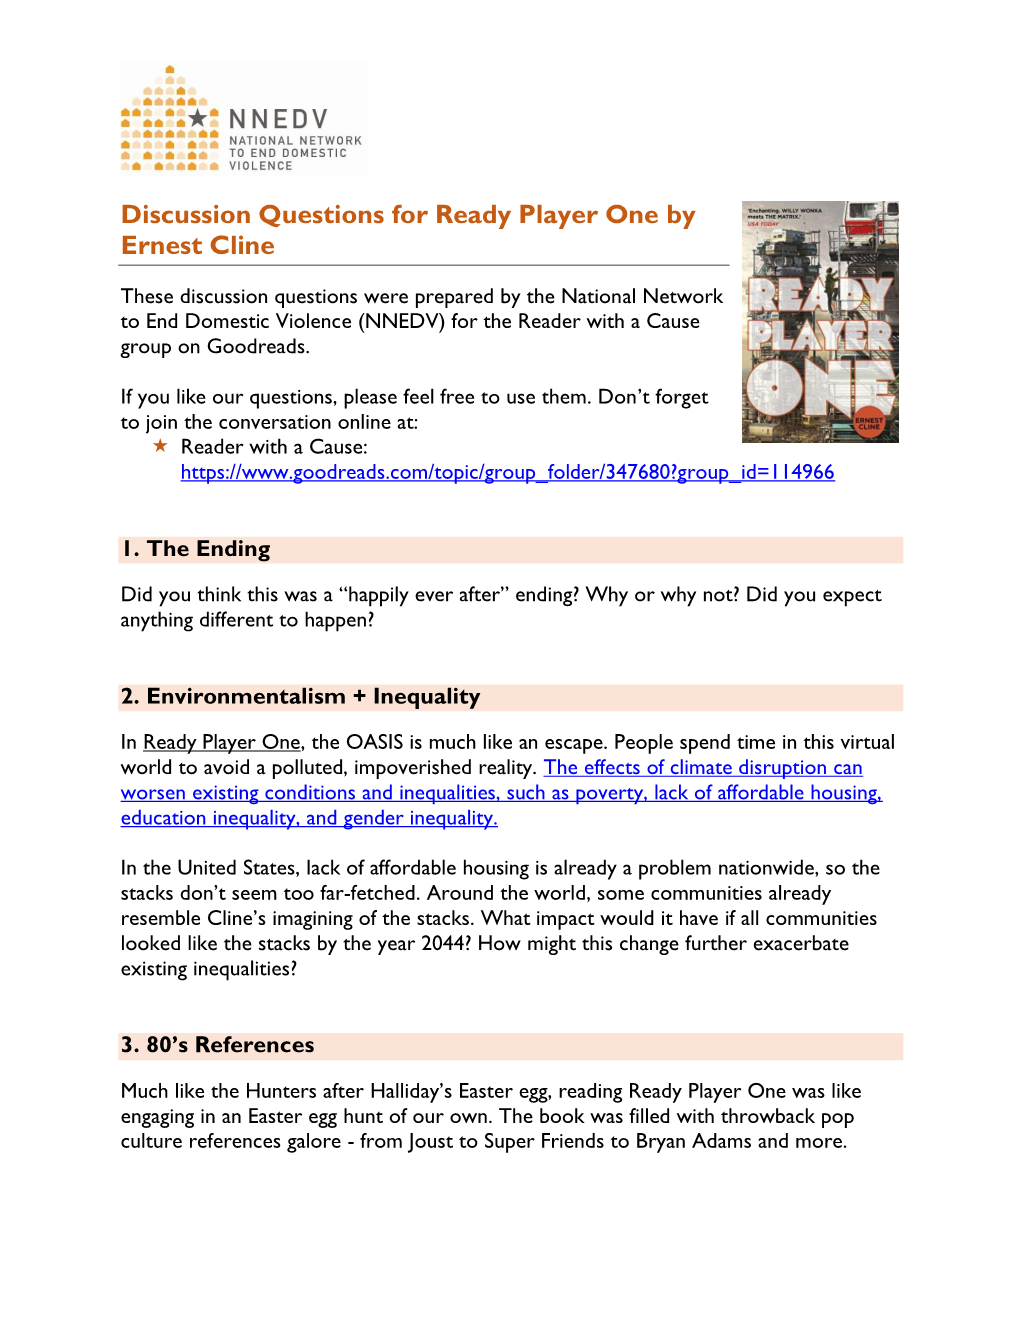 Discussion Questions for Ready Player One by Ernest Cline